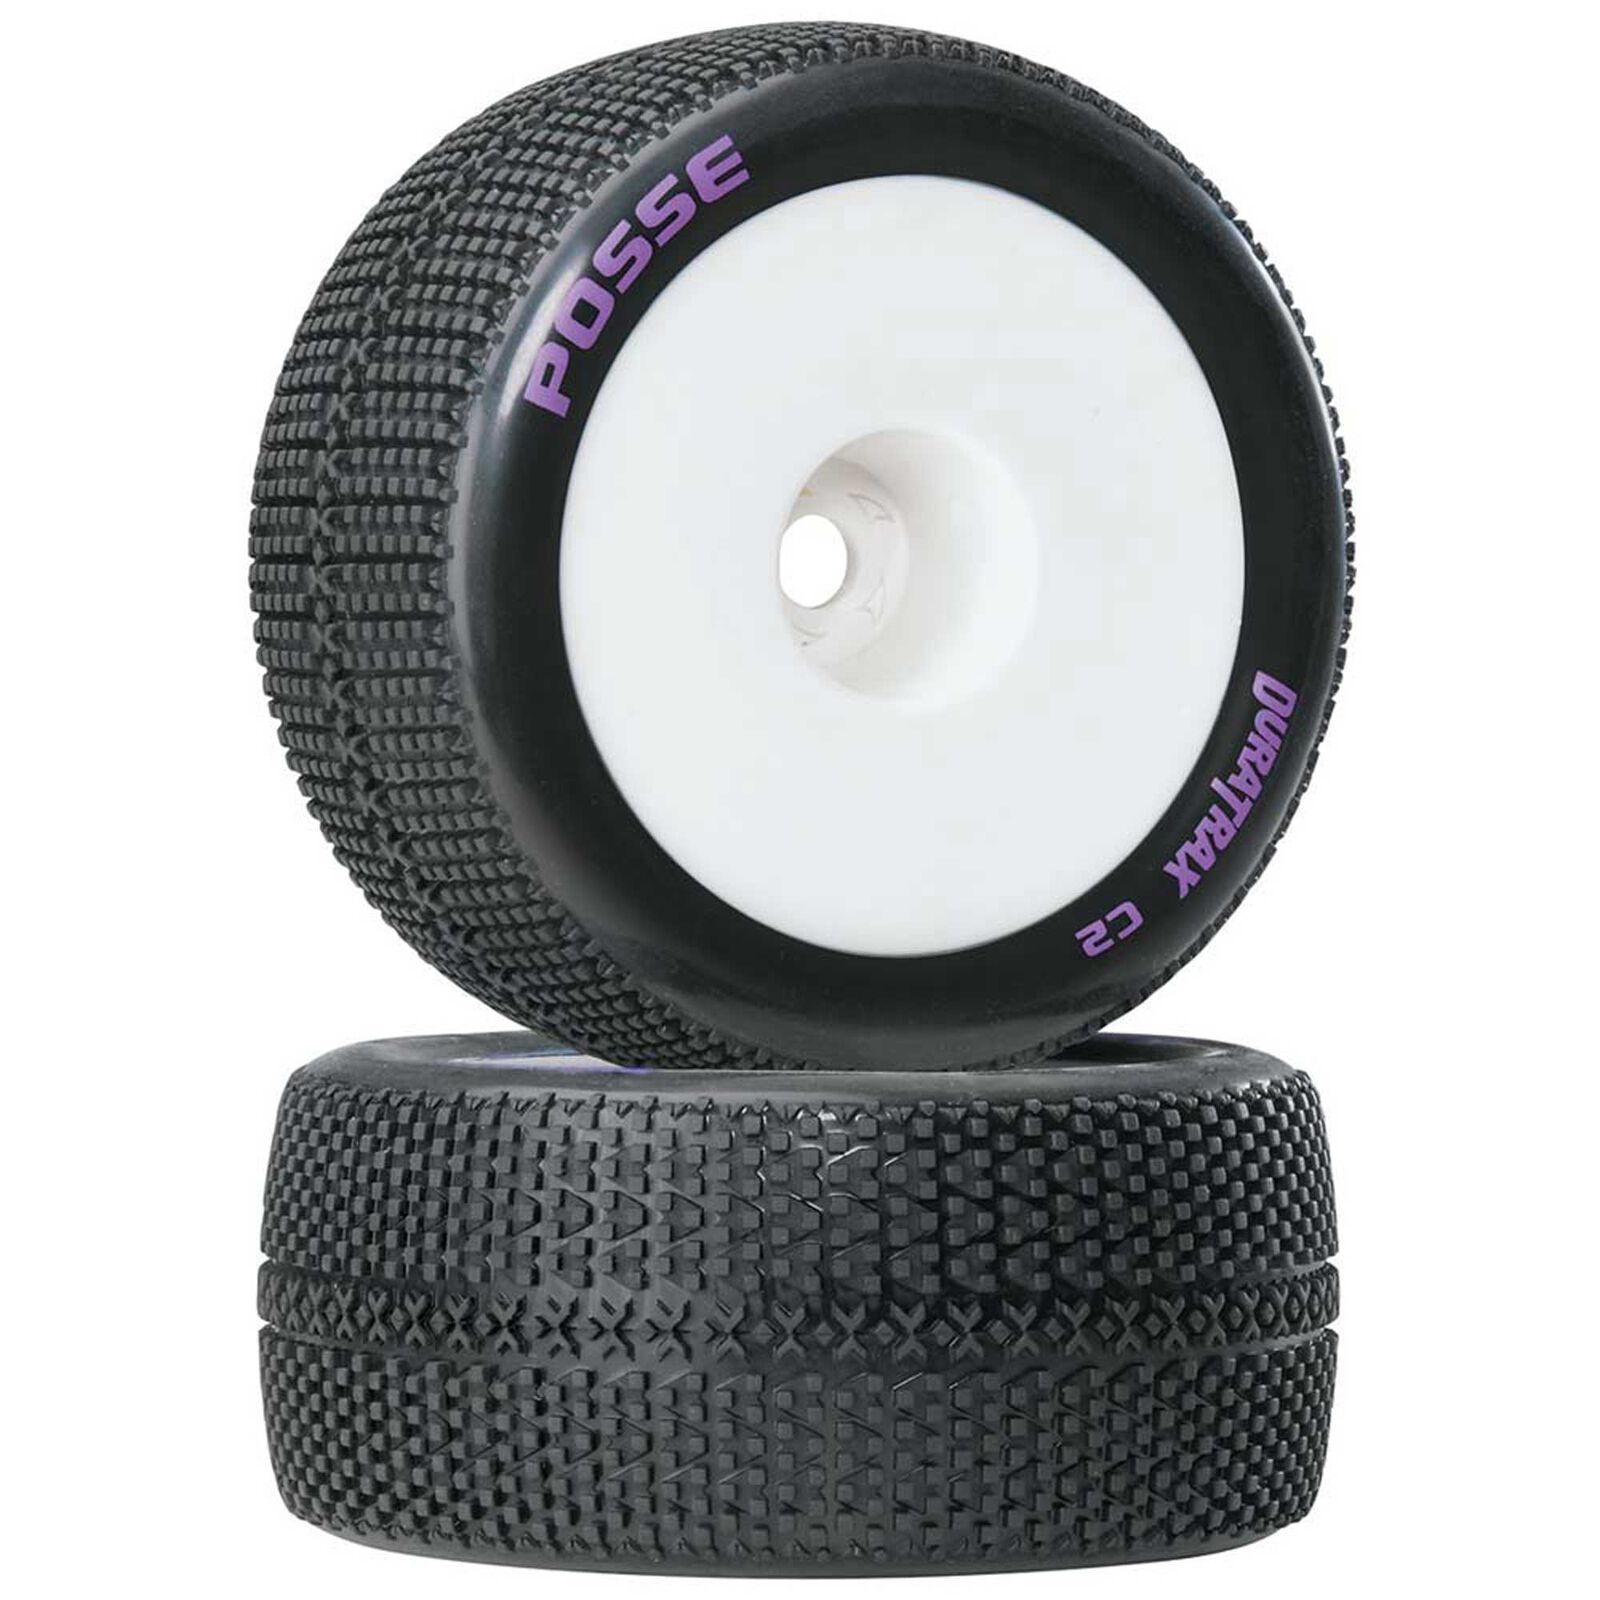 Posse 1/8 Mounted 1/2" Offset C2 Truggy Tires (2)